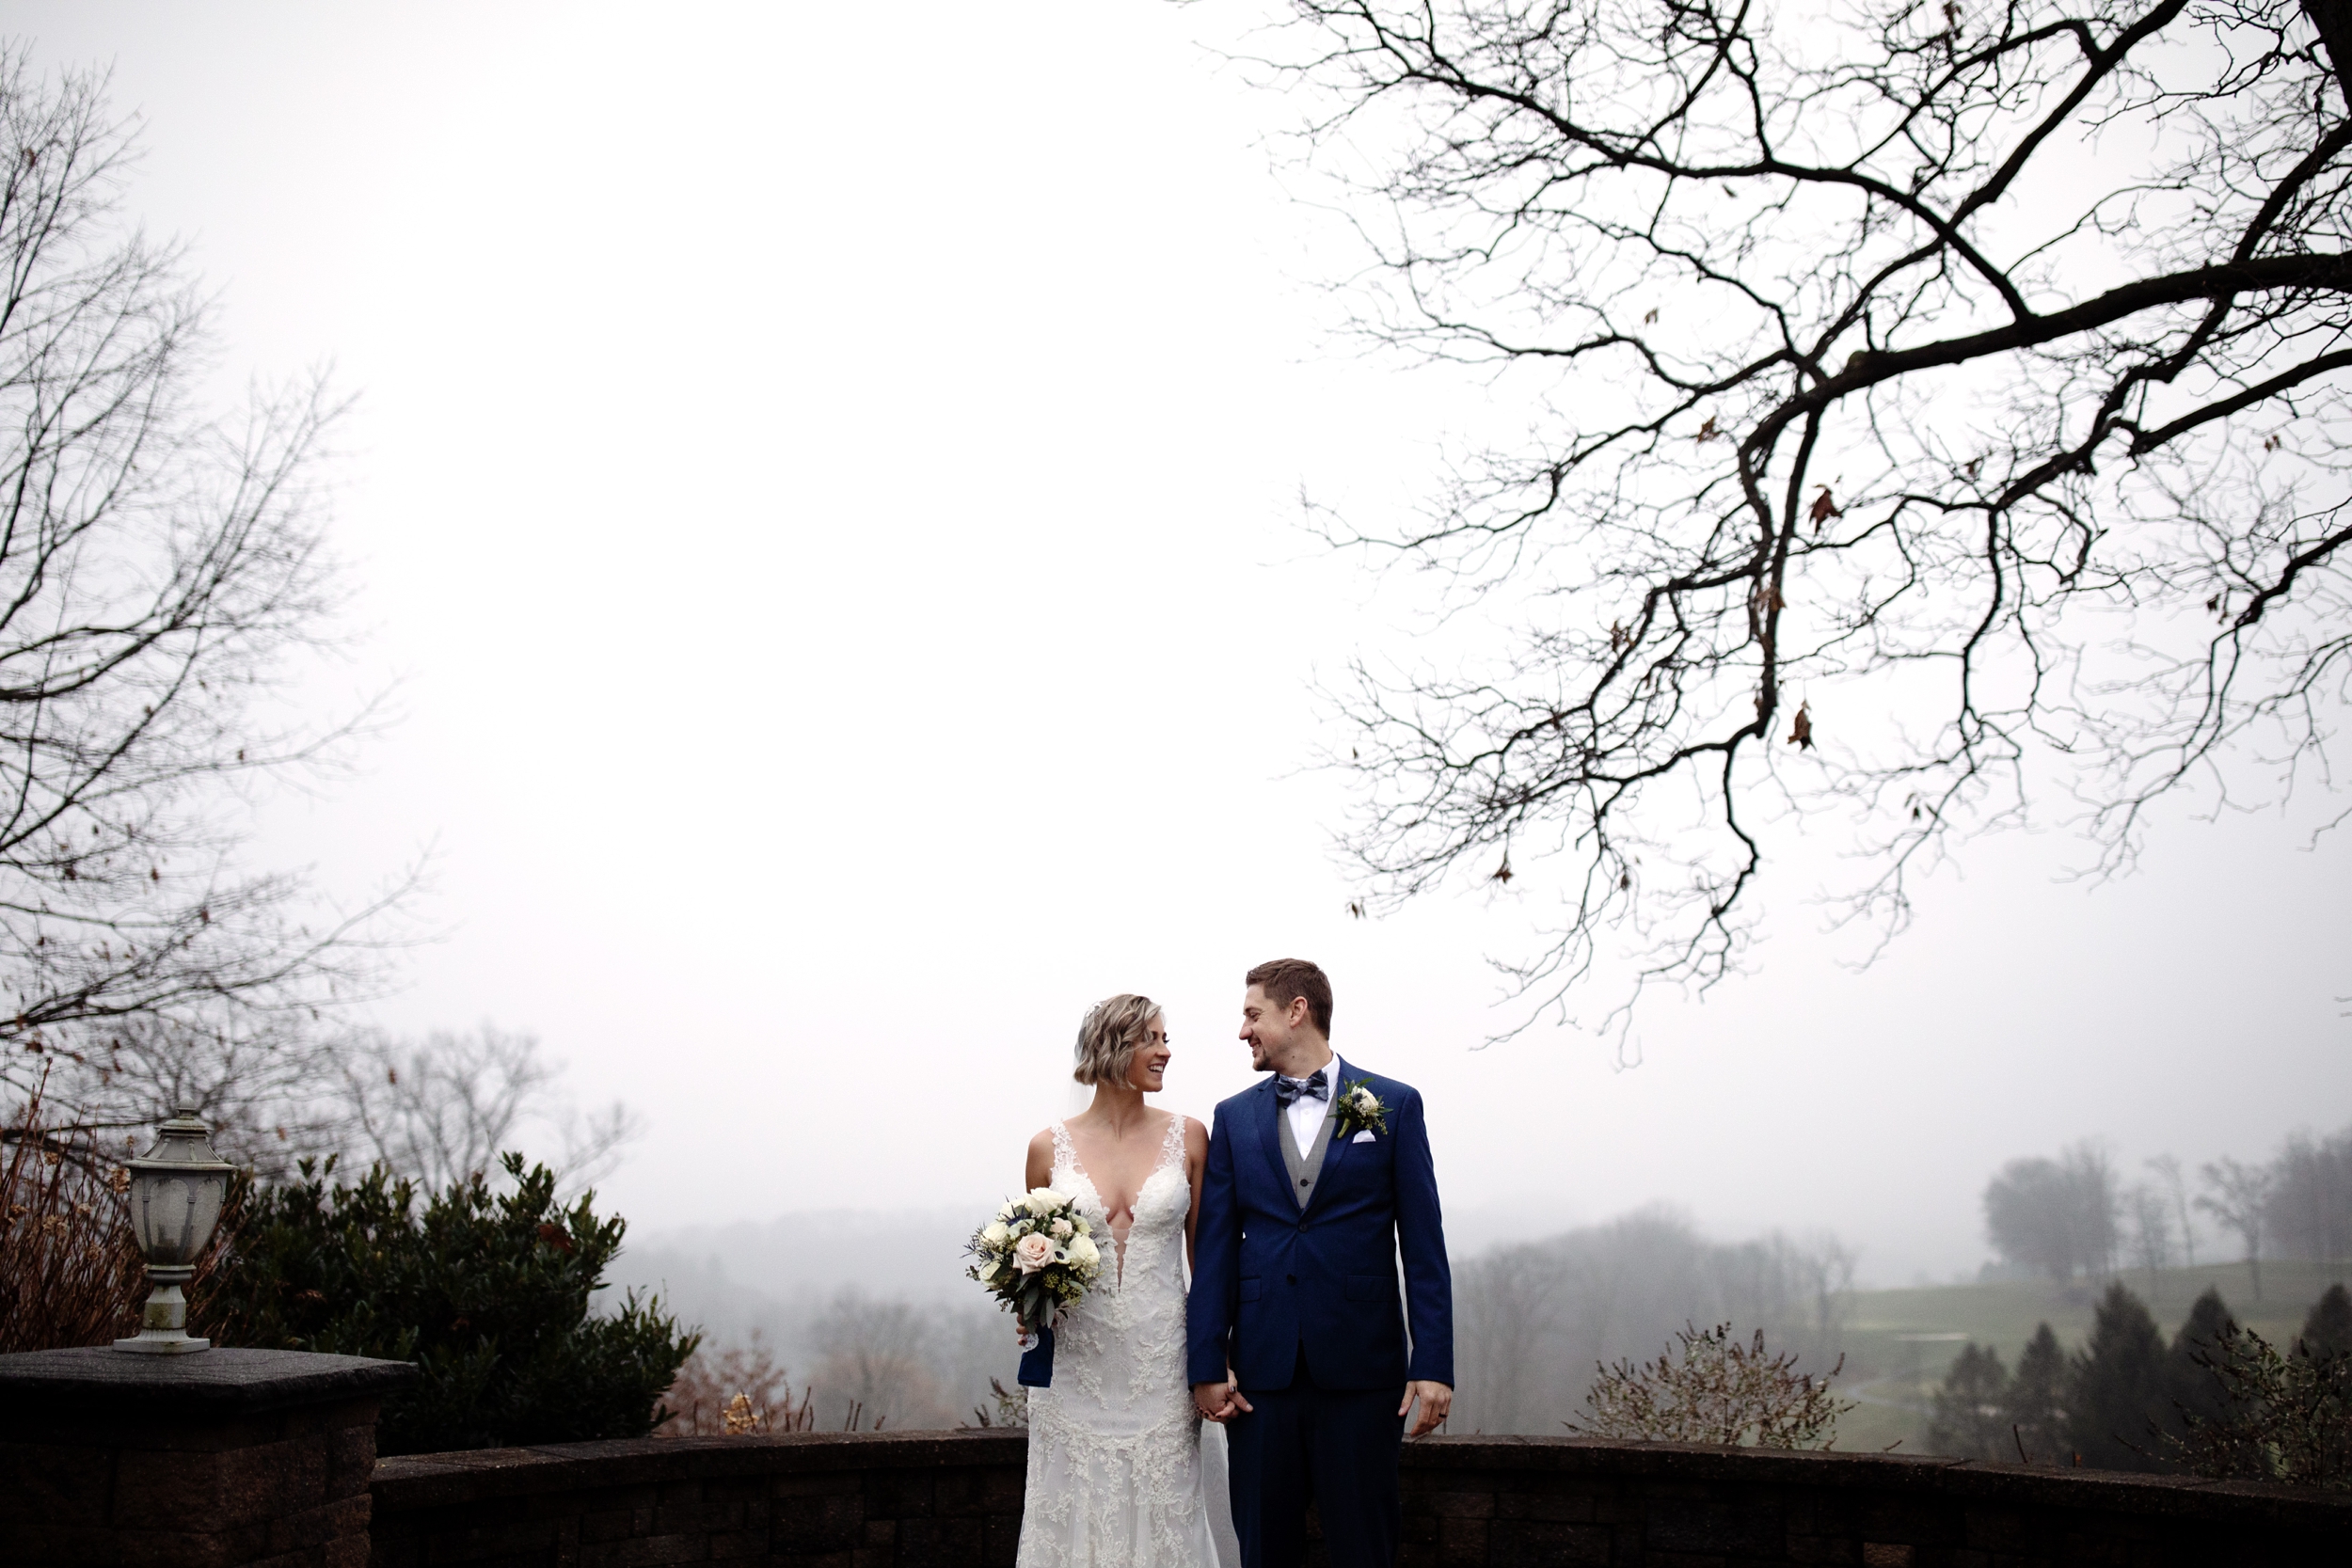 Woodstone Lodge and Country Club, Allentown, PA foggy romantic wedding, captured by East Coast Destination Wedding Photographers Janae Rose Photography